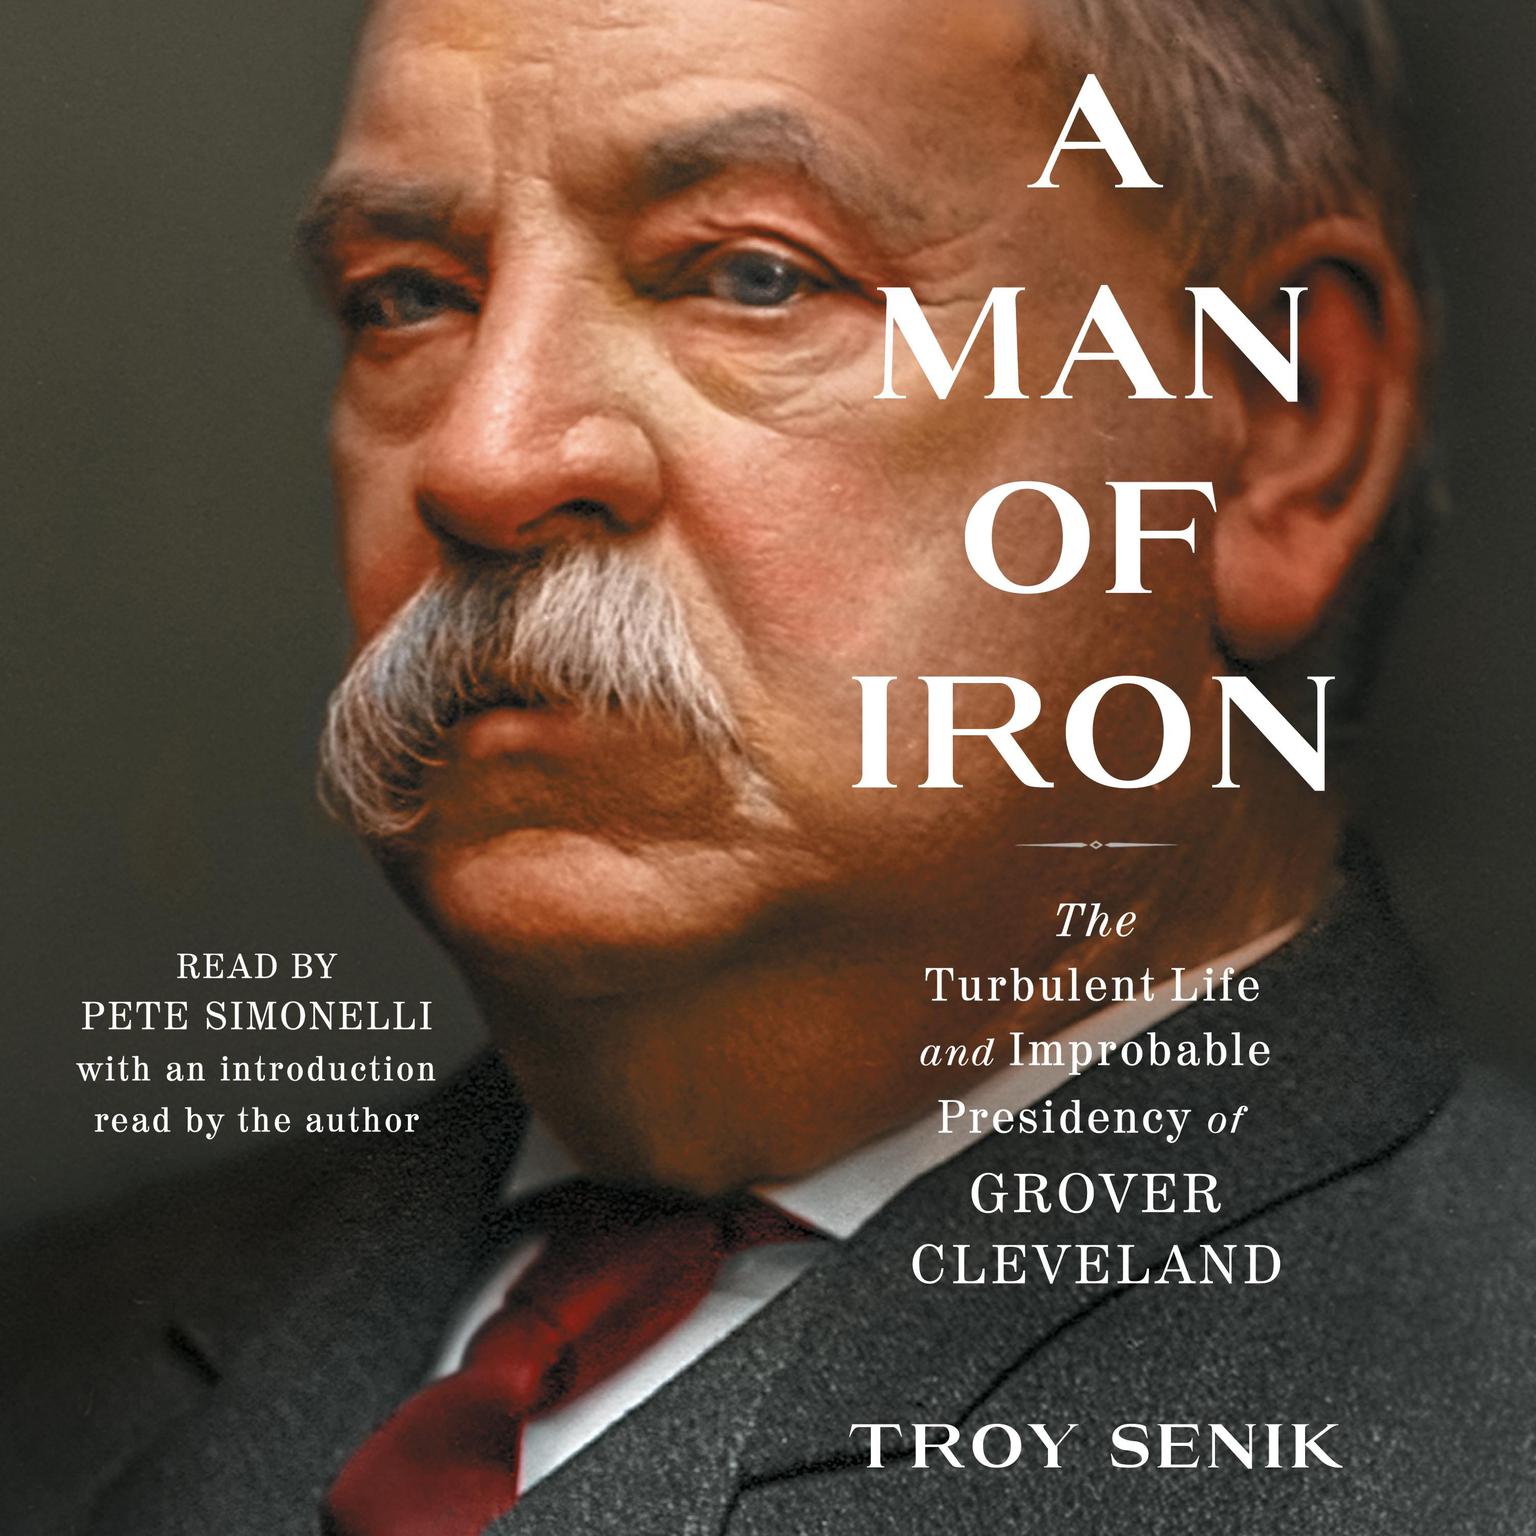 A Man of Iron: The Turbulent Life and Improbable Presidency of Grover Cleveland Audiobook, by Troy Senik